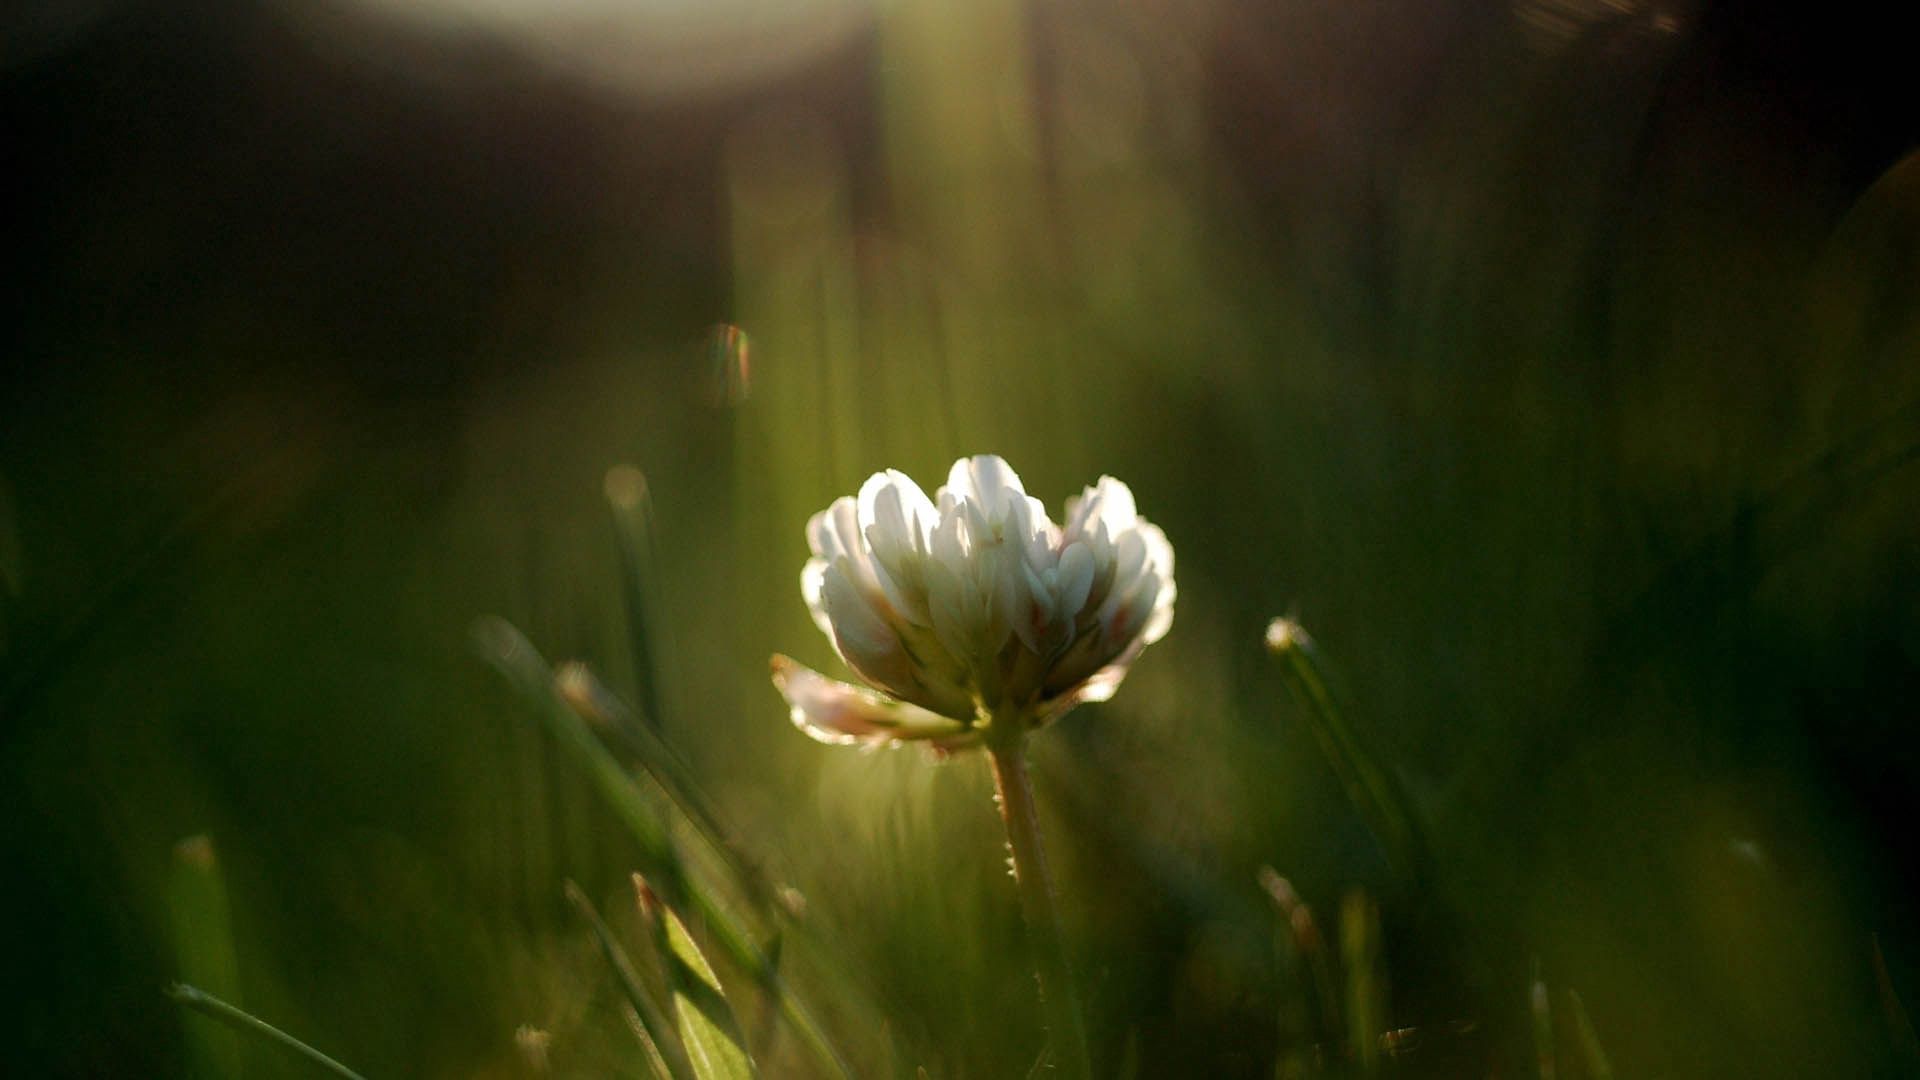 135221 download wallpaper grass, flower, macro, shine, light, clover screensavers and pictures for free